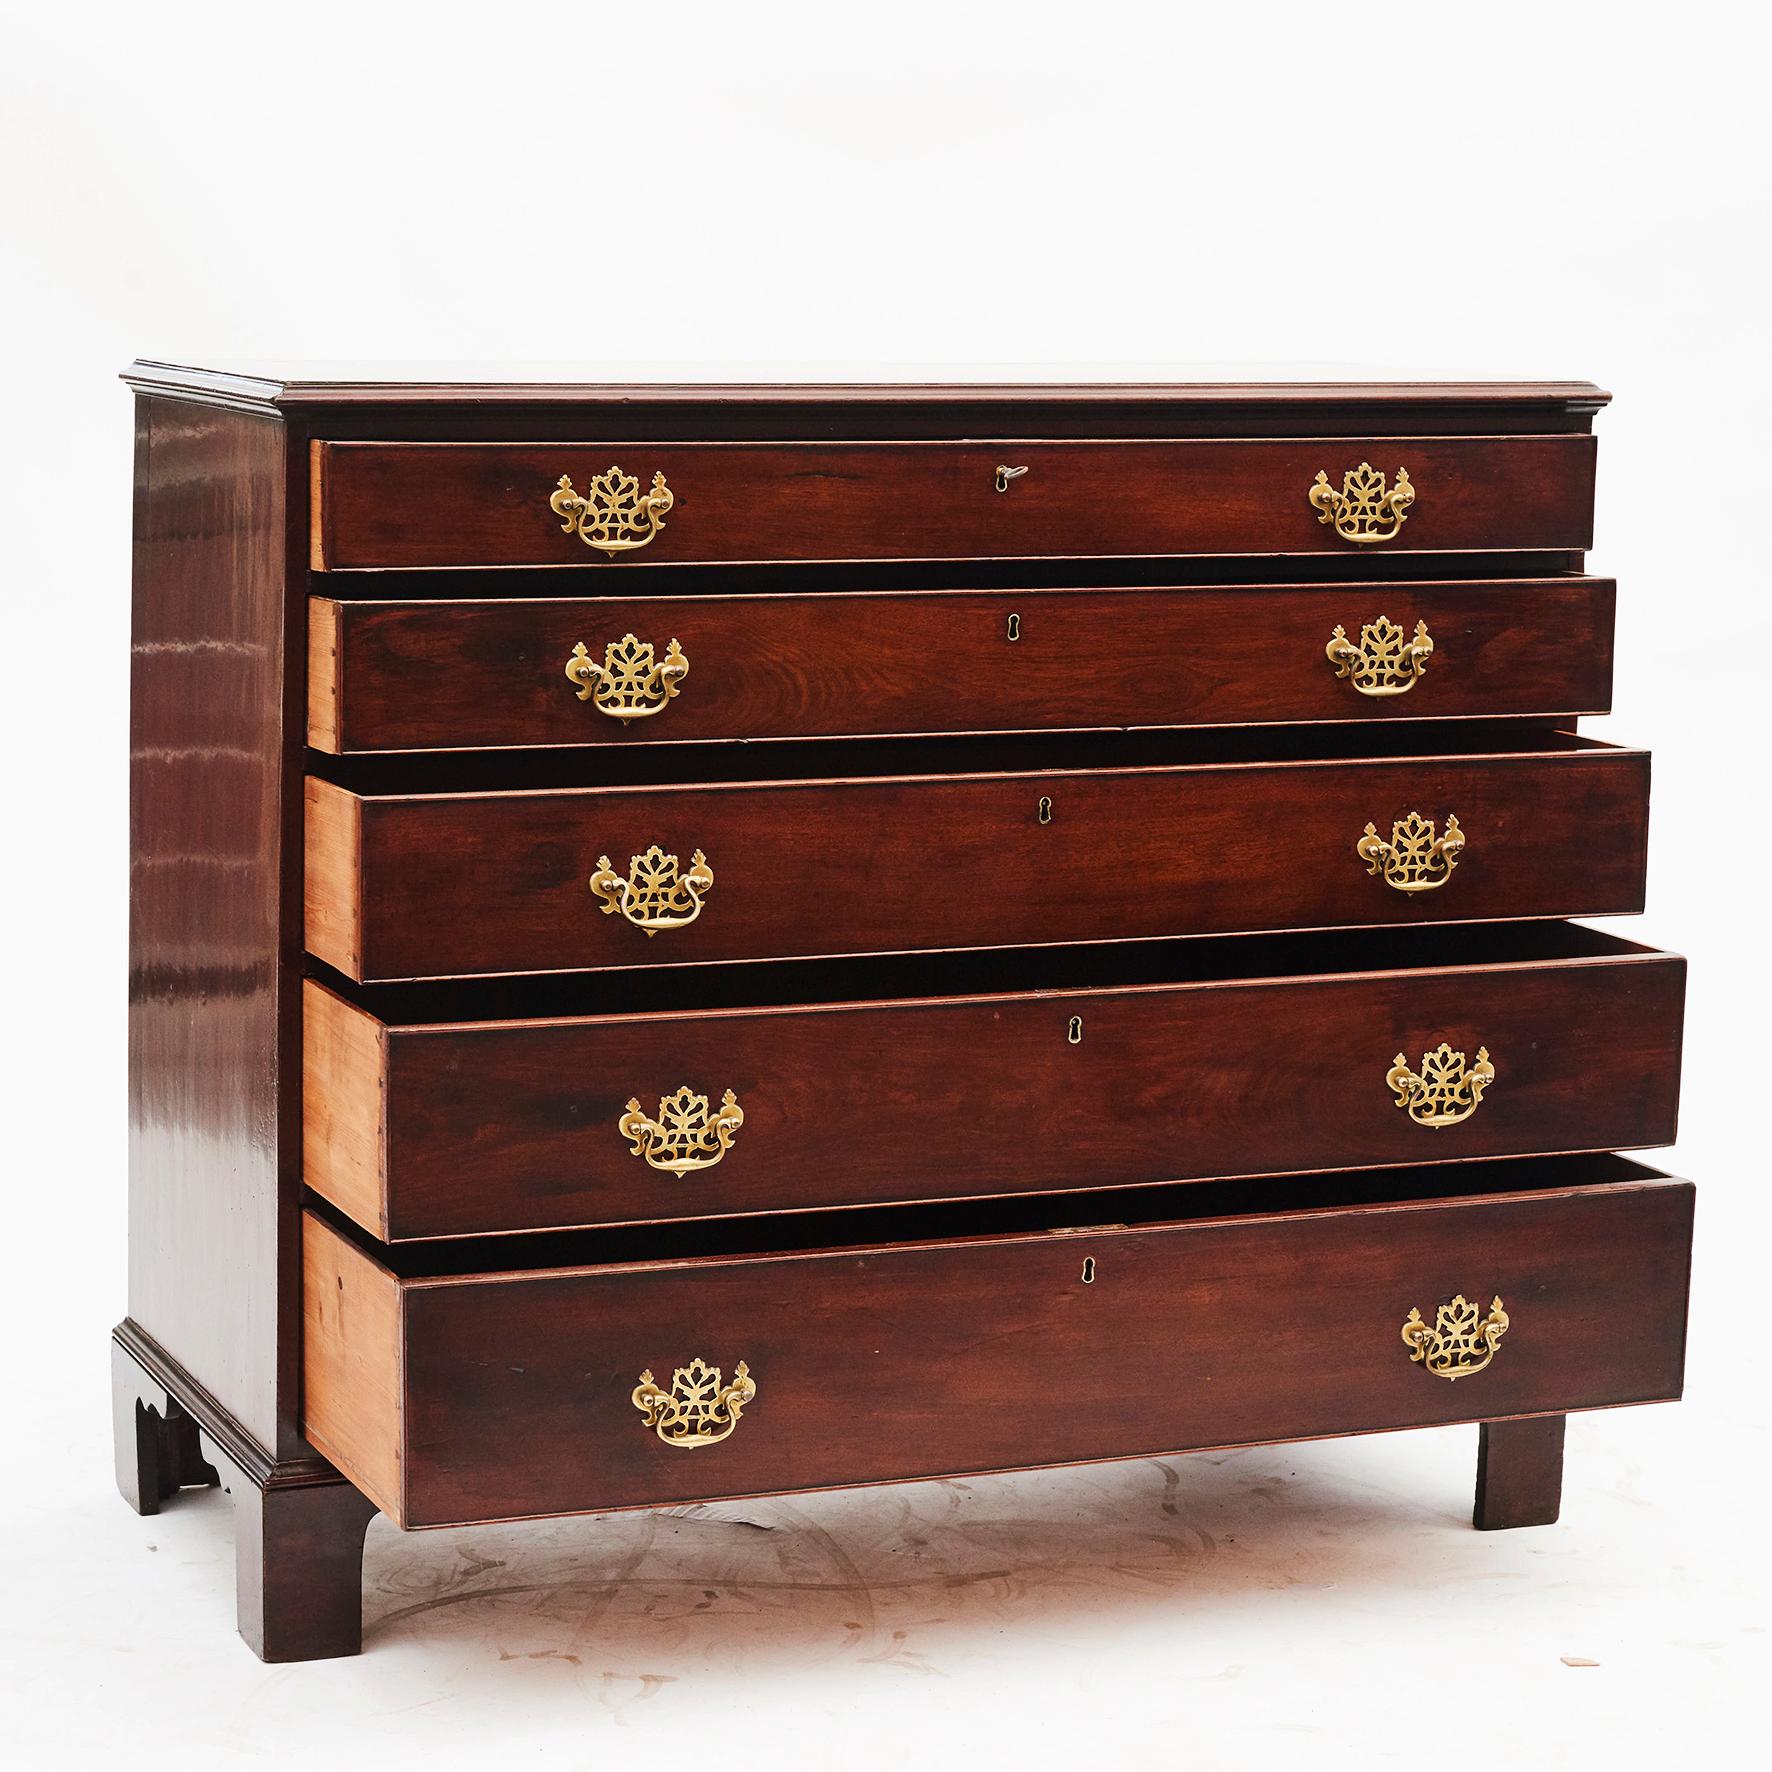 Danish 19th Century Empire Mahogany Commode In Good Condition For Sale In Kastrup, DK